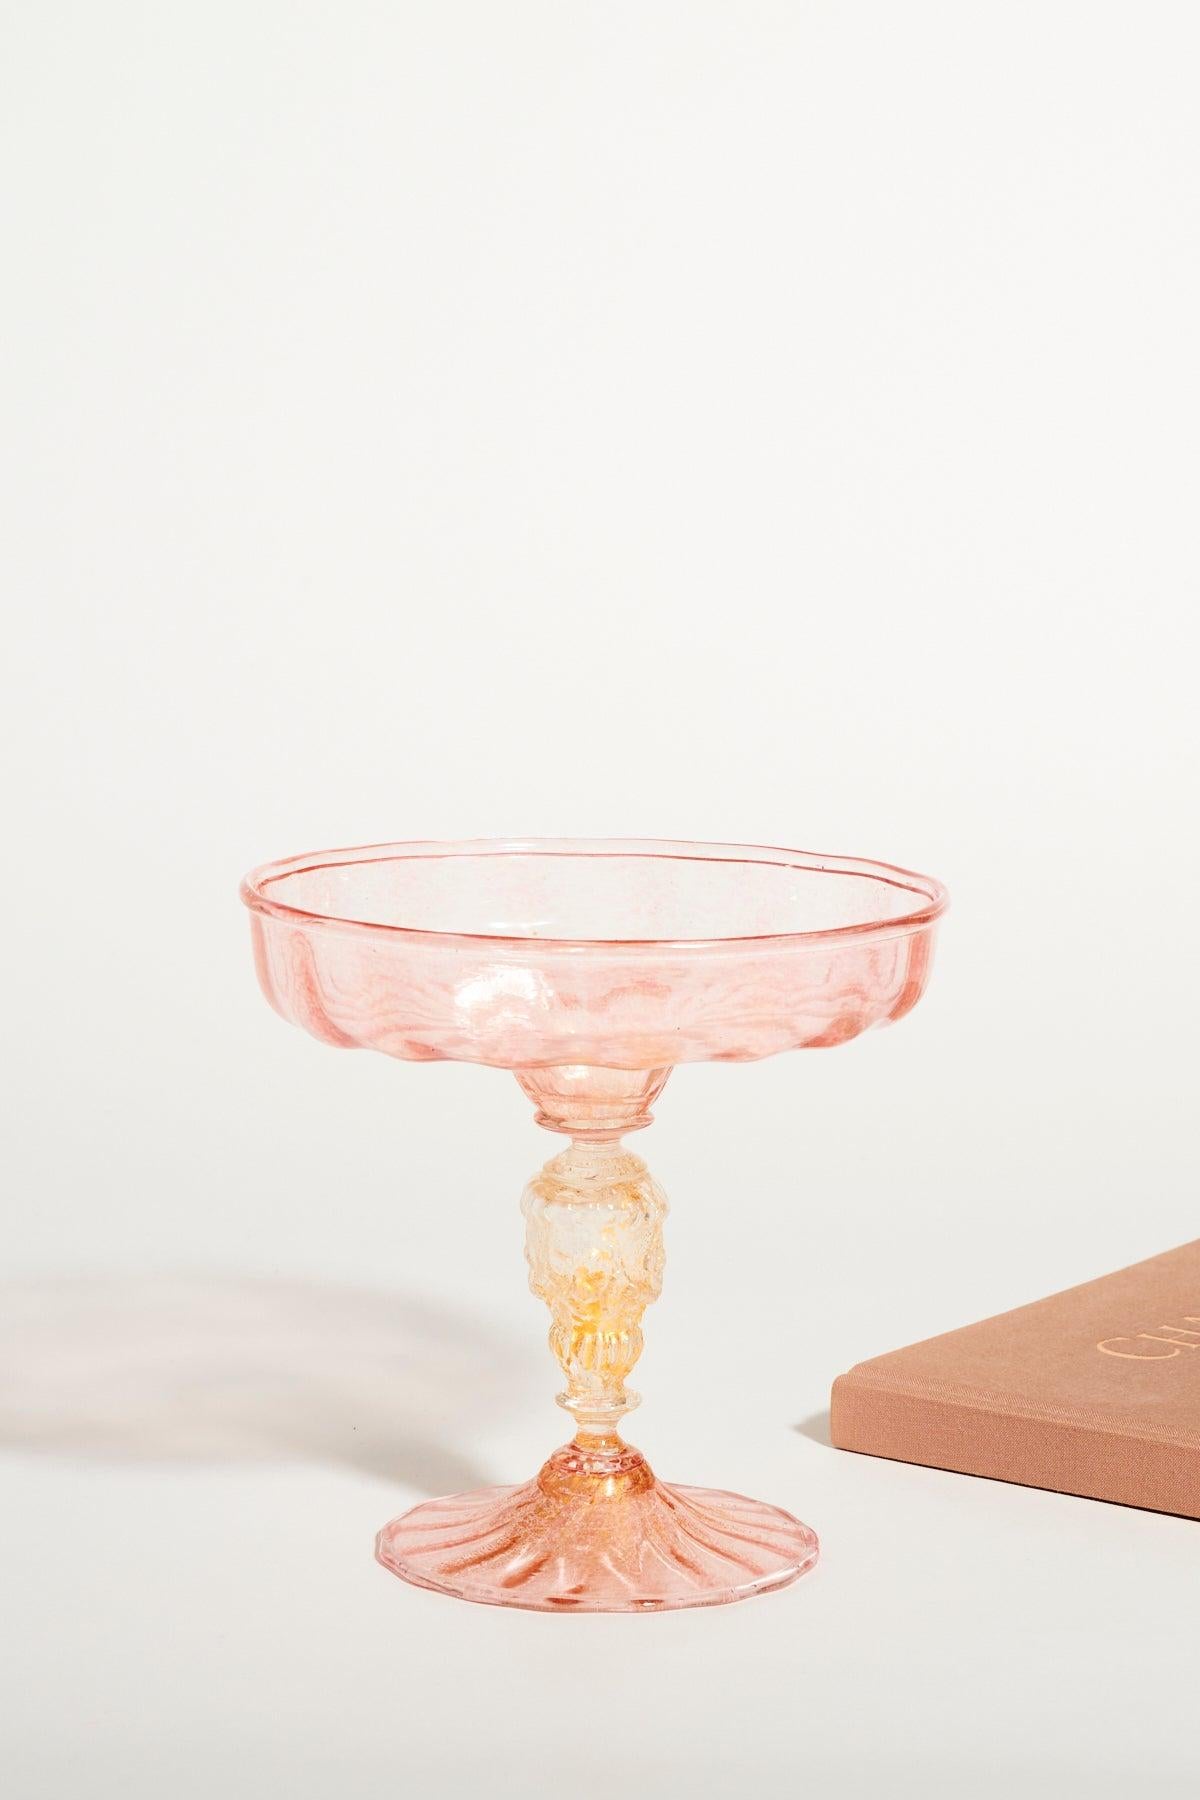 Mid-20th Century Venetian Pink and Gold Flecked Compote